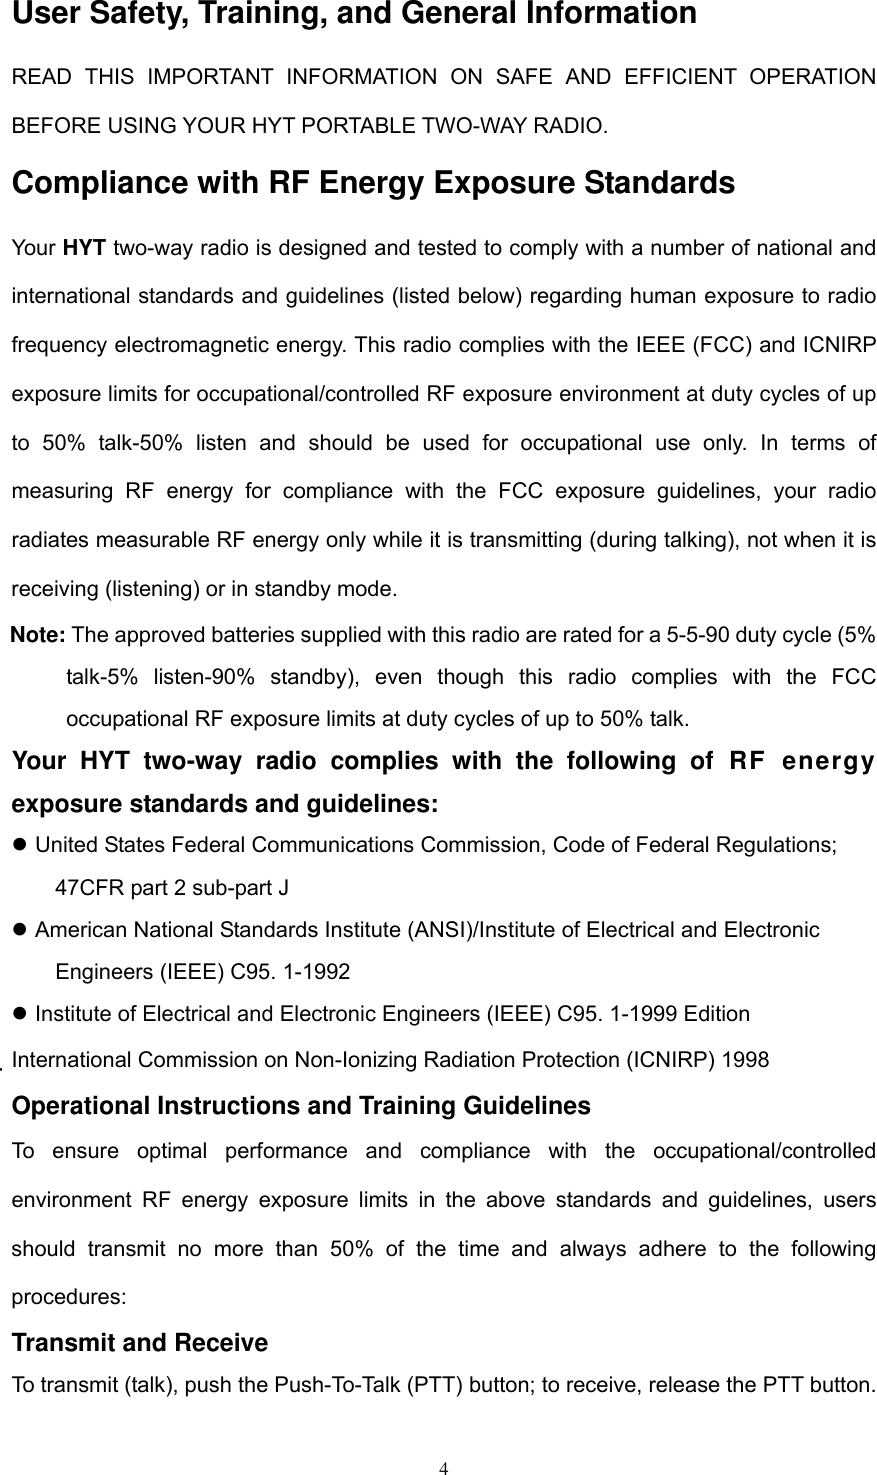  4User Safety, Training, and General Information READ THIS IMPORTANT INFORMATION ON SAFE AND EFFICIENT OPERATION BEFORE USING YOUR HYT PORTABLE TWO-WAY RADIO. Compliance with RF Energy Exposure Standards Your HYT two-way radio is designed and tested to comply with a number of national and international standards and guidelines (listed below) regarding human exposure to radio frequency electromagnetic energy. This radio complies with the IEEE (FCC) and ICNIRP exposure limits for occupational/controlled RF exposure environment at duty cycles of up to 50% talk-50% listen and should be used for occupational use only. In terms of measuring RF energy for compliance with the FCC exposure guidelines, your radio radiates measurable RF energy only while it is transmitting (during talking), not when it is receiving (listening) or in standby mode. Note: The approved batteries supplied with this radio are rated for a 5-5-90 duty cycle (5% talk-5% listen-90% standby), even though this radio complies with the FCC occupational RF exposure limits at duty cycles of up to 50% talk. Your HYT two-way radio complies with the following of RF energy exposure standards and guidelines:  United States Federal Communications Commission, Code of Federal Regulations; 47CFR part 2 sub-part J  American National Standards Institute (ANSI)/Institute of Electrical and Electronic Engineers (IEEE) C95. 1-1992  Institute of Electrical and Electronic Engineers (IEEE) C95. 1-1999 Edition International Commission on Non-Ionizing Radiation Protection (ICNIRP) 1998 Operational Instructions and Training Guidelines To ensure optimal performance and compliance with the occupational/controlled environment RF energy exposure limits in the above standards and guidelines, users should transmit no more than 50% of the time and always adhere to the following procedures: Transmit and Receive To transmit (talk), push the Push-To-Talk (PTT) button; to receive, release the PTT button. 